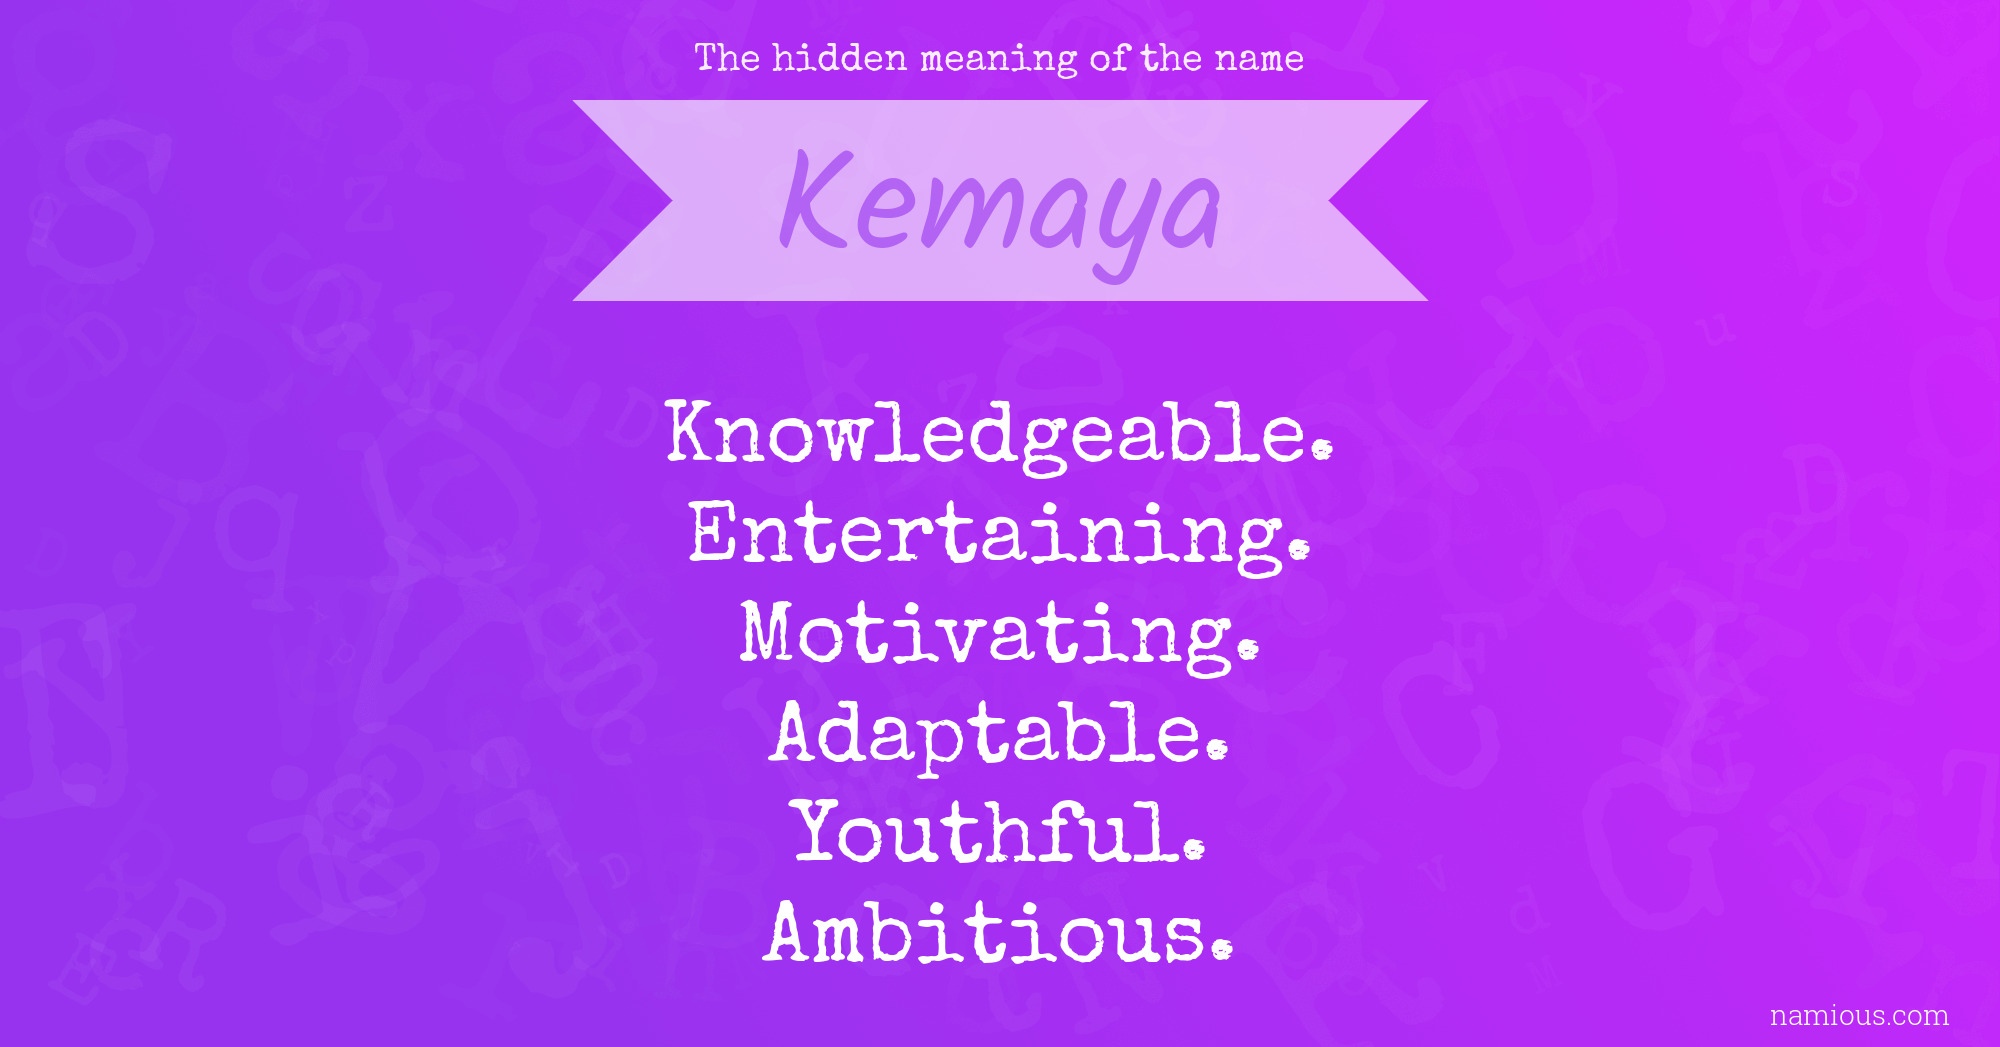 The hidden meaning of the name Kemaya